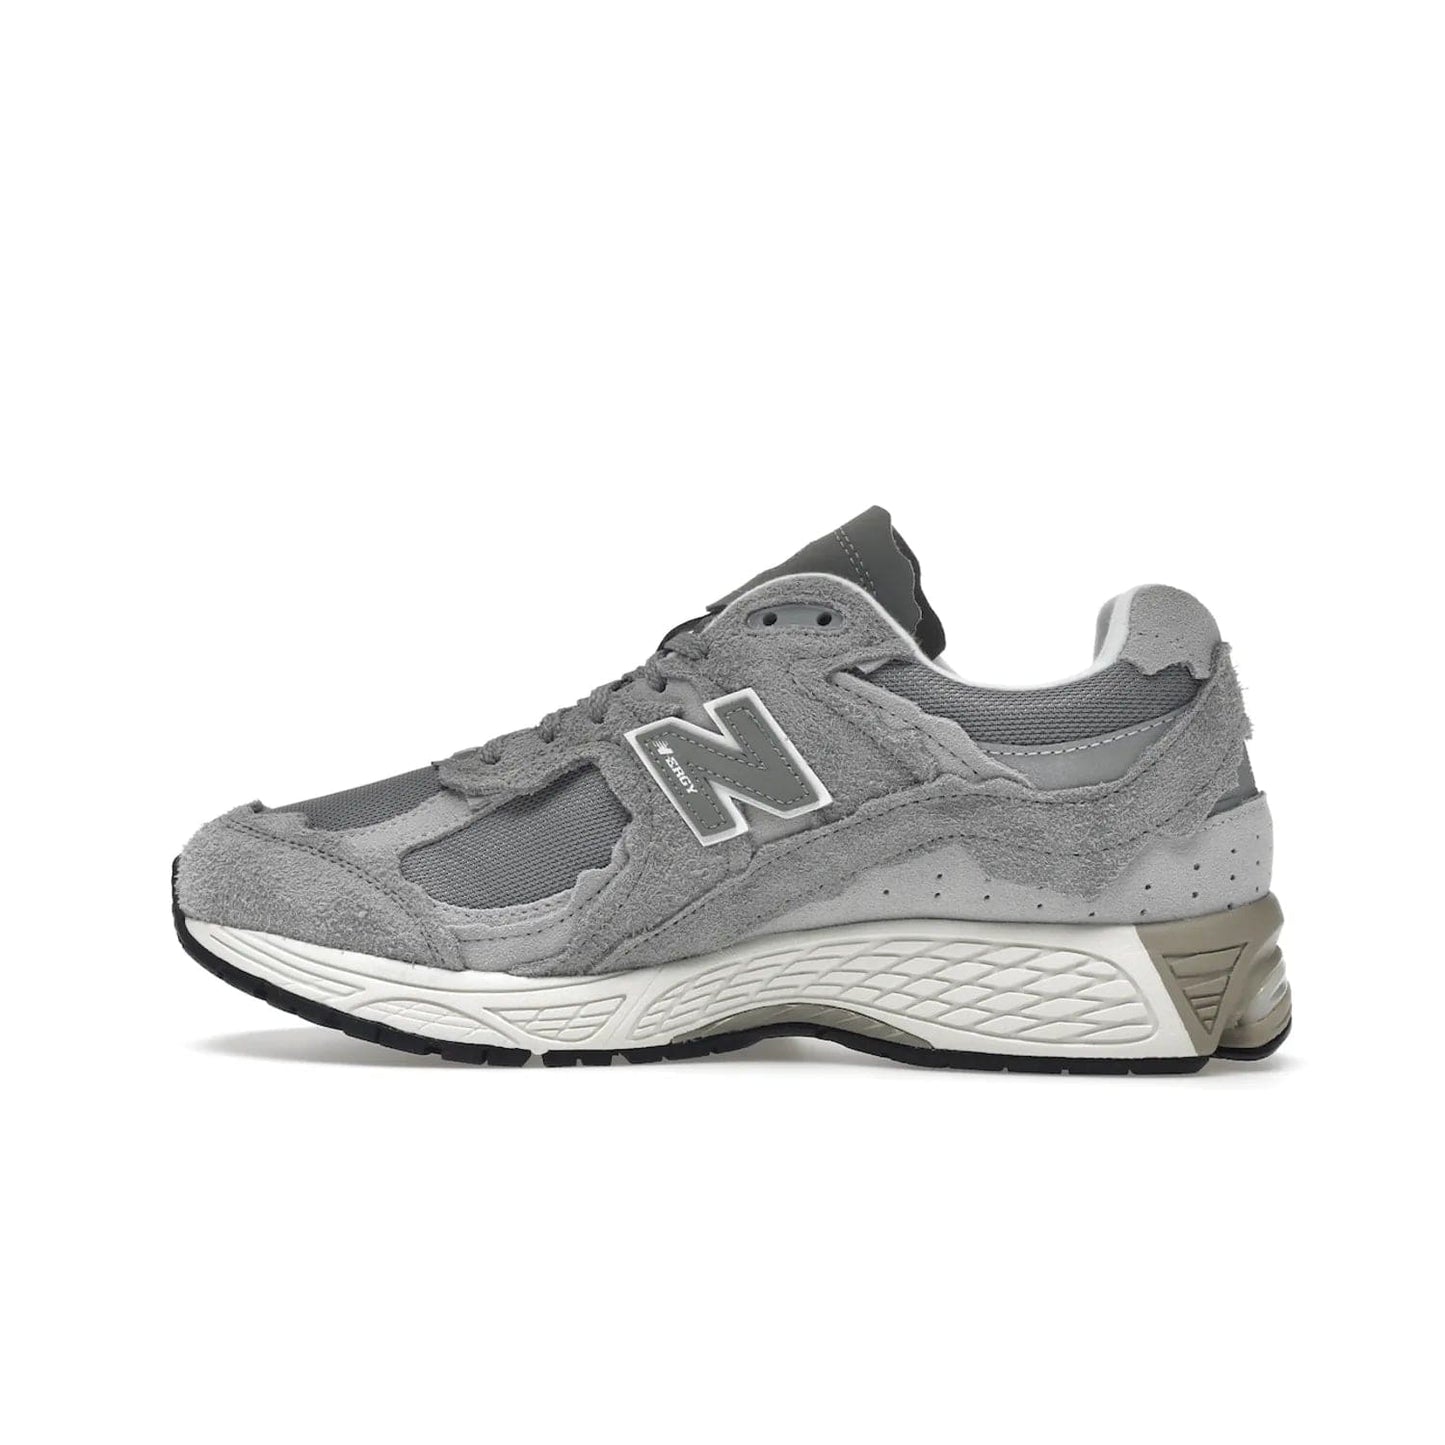 New Balance 2002R Protection Pack Grey - Image 20 - Only at www.BallersClubKickz.com - The New Balance 2002R Protection Pack Grey provides superior protection and all-day comfort. It features a blend of synthetic and mesh materials, foam midsole, rubber outsole, and a toe cap and heel counter. Show off the classic "N" logo and "2002R" lettering. Get a pair on February 14, 2023 for protection and style.